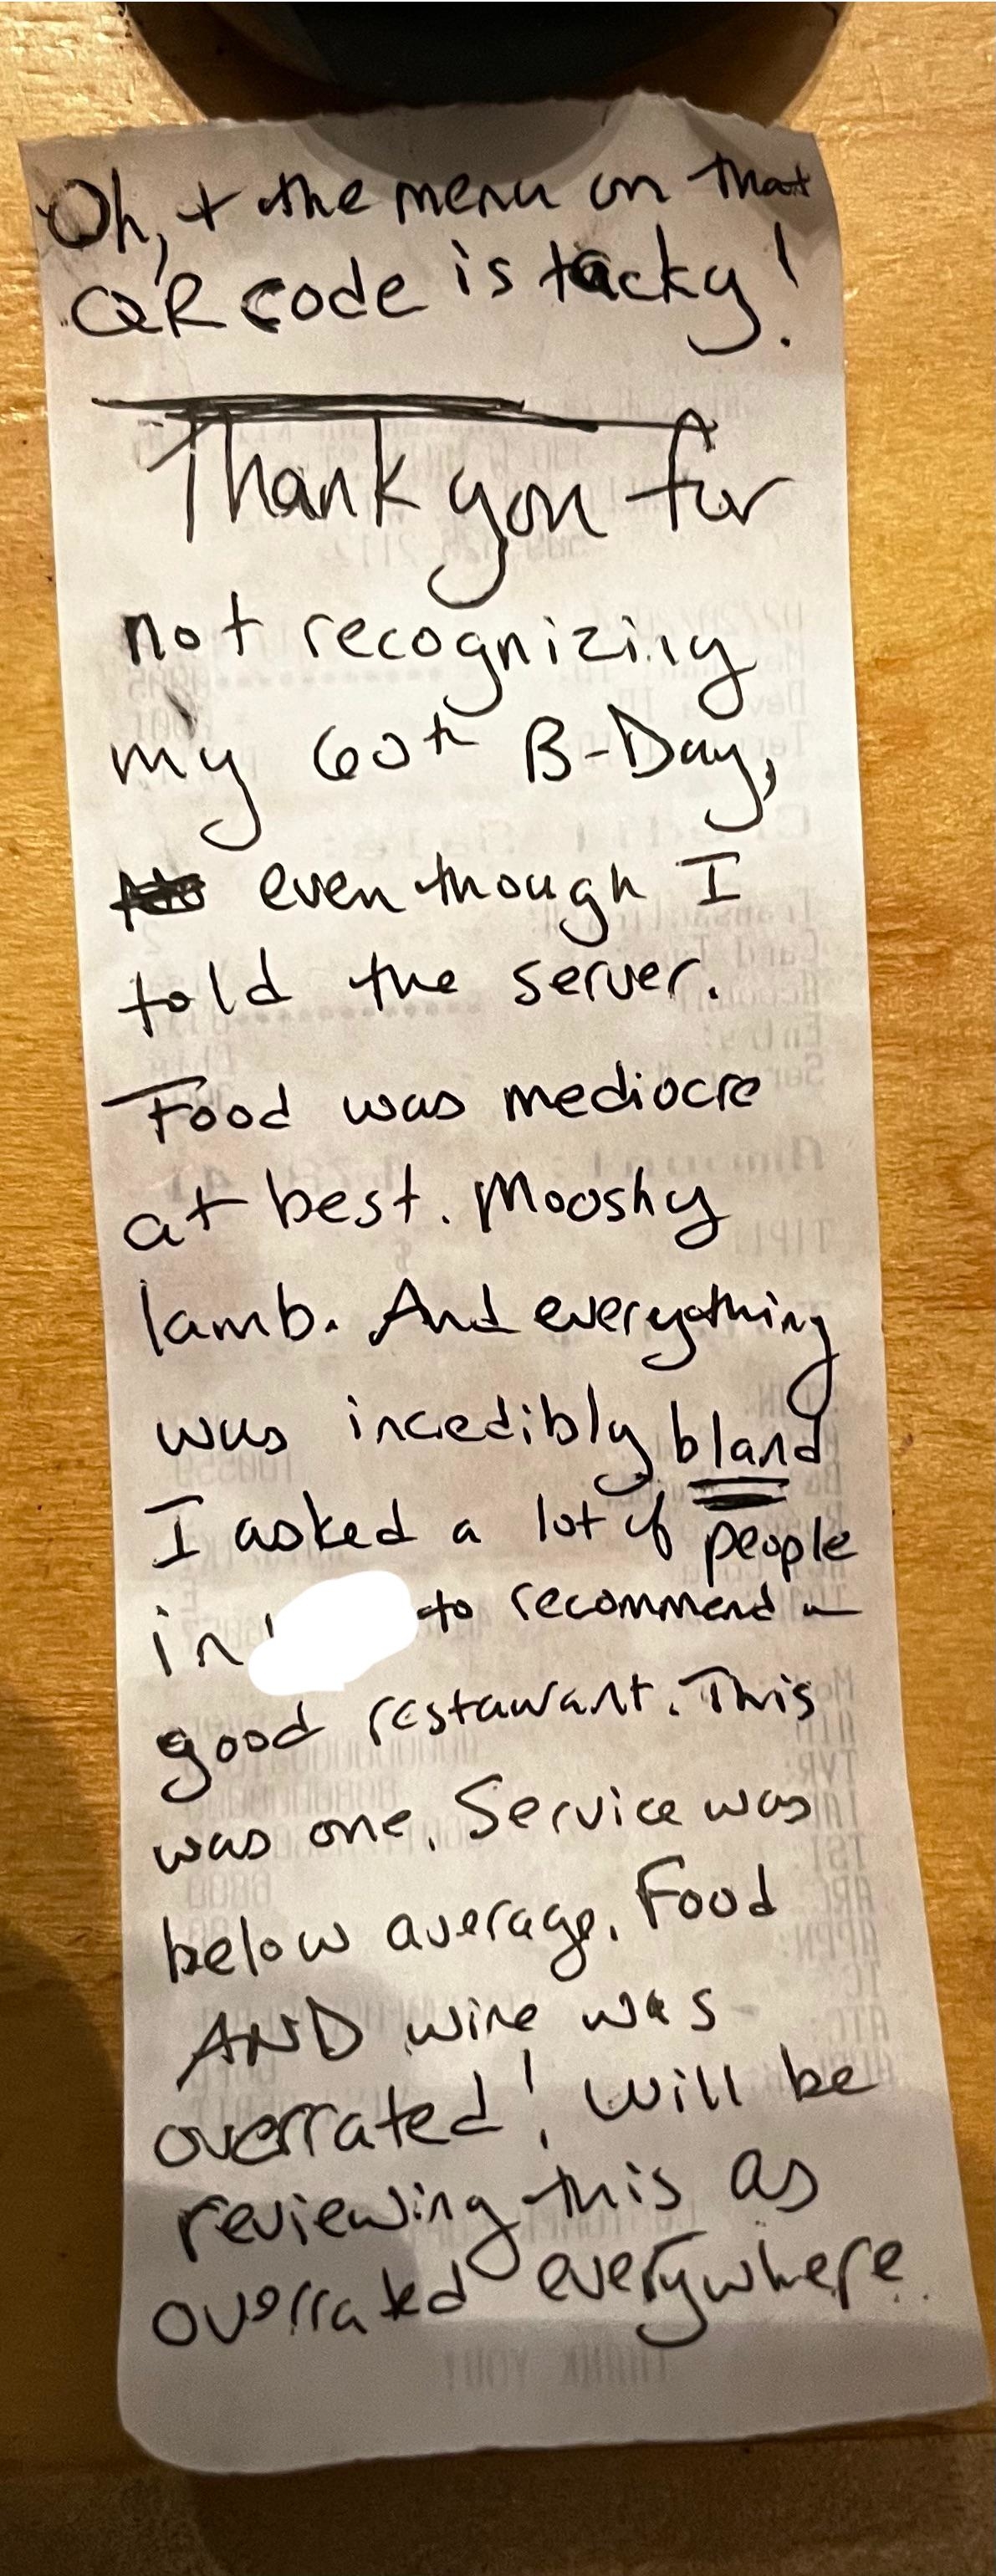 Note left on a table expressing dissatisfaction with a meal, mentioning overcooked lamb and overall negative dining experience